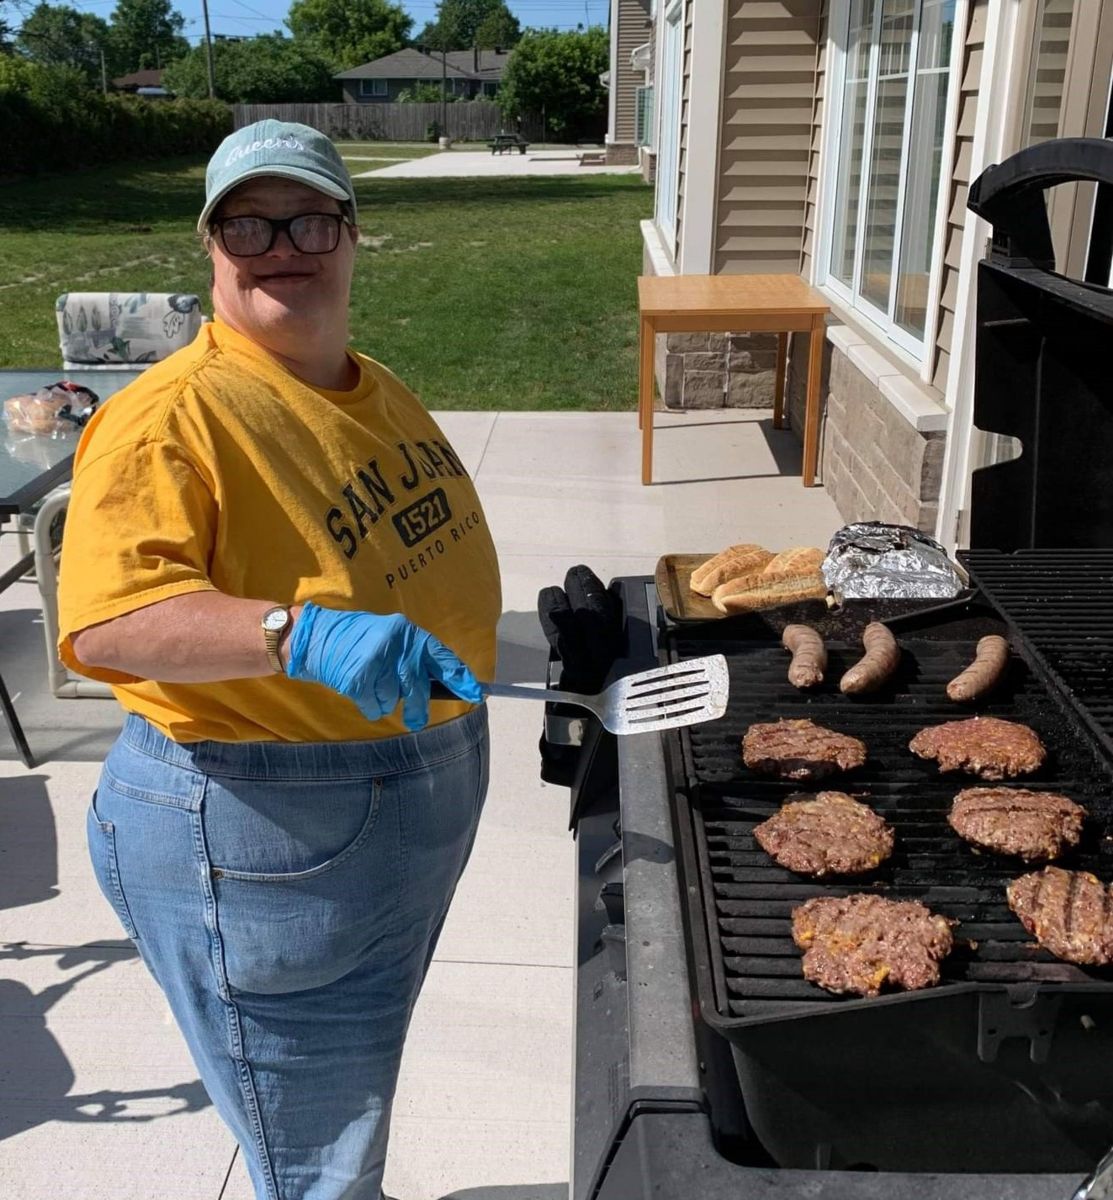 Ann is outside making dinner on the BBQ